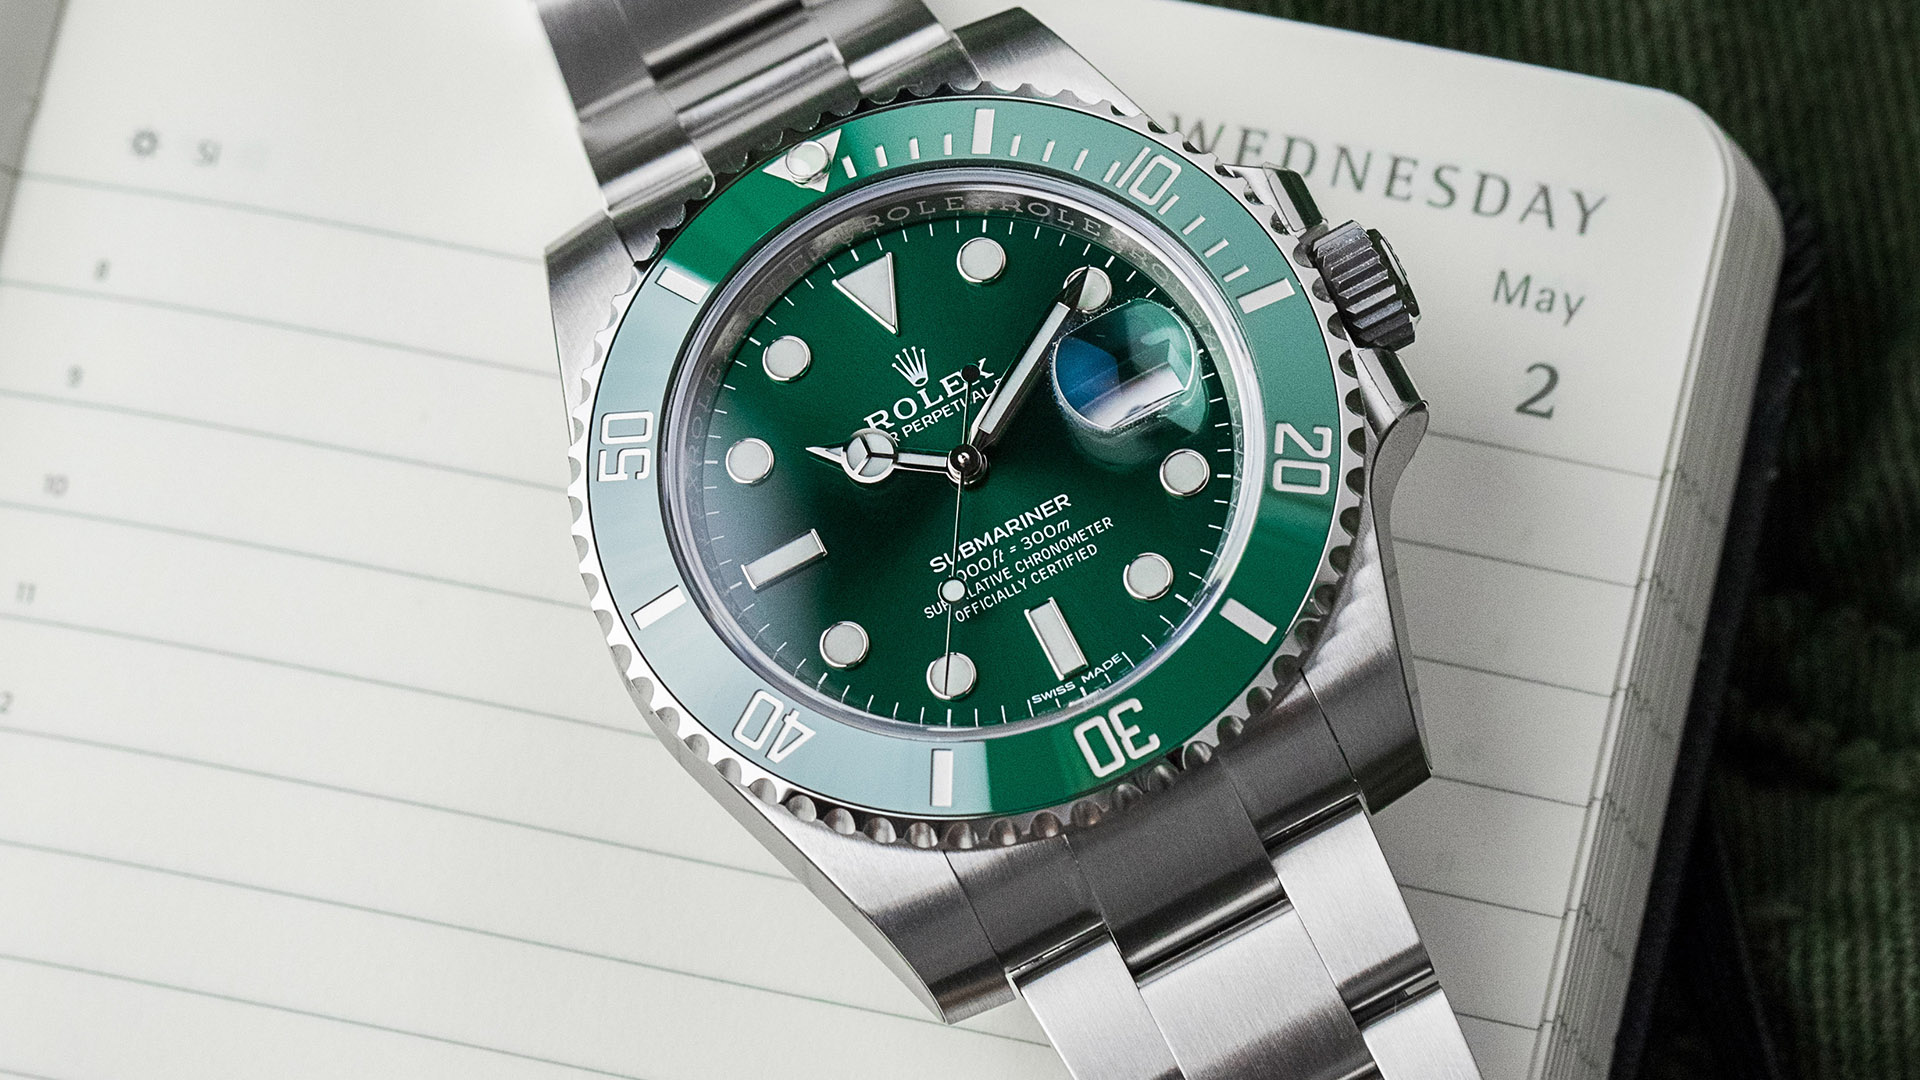 Discover the 5 Best Rolex Watches for Investment in 2020 and Beyond